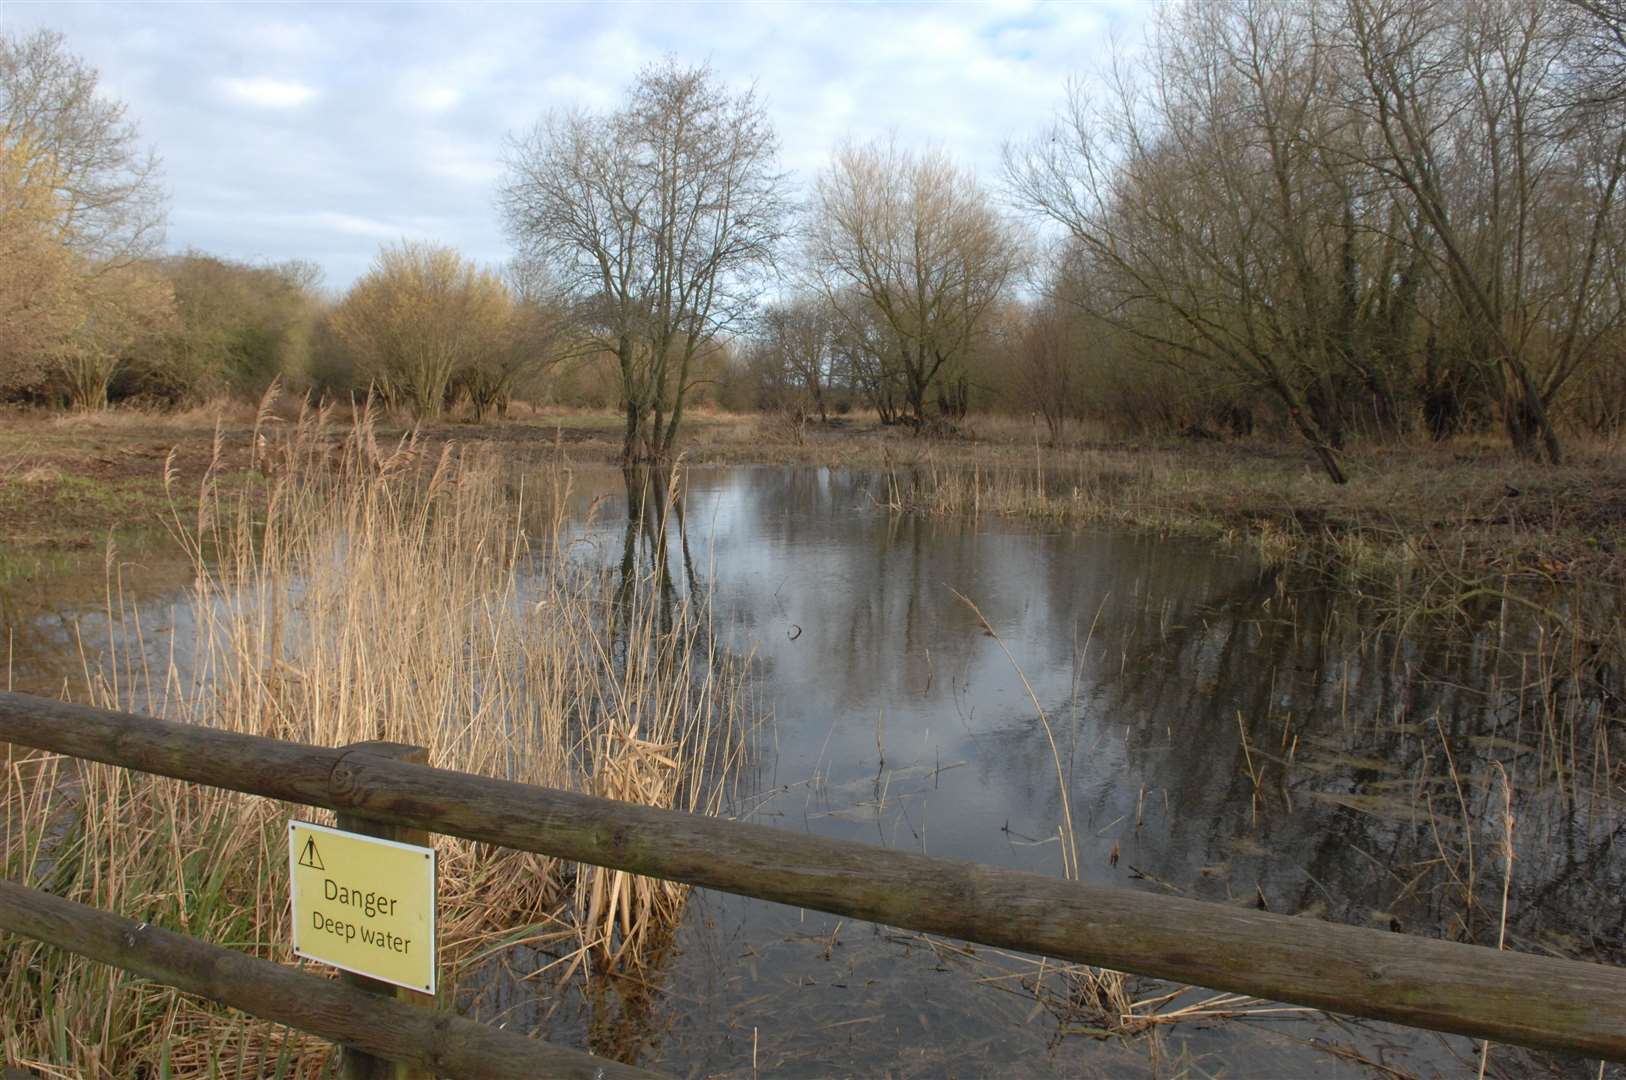 Stodmarsh Nature Reserve near Canterbury is suffering from poor water quality